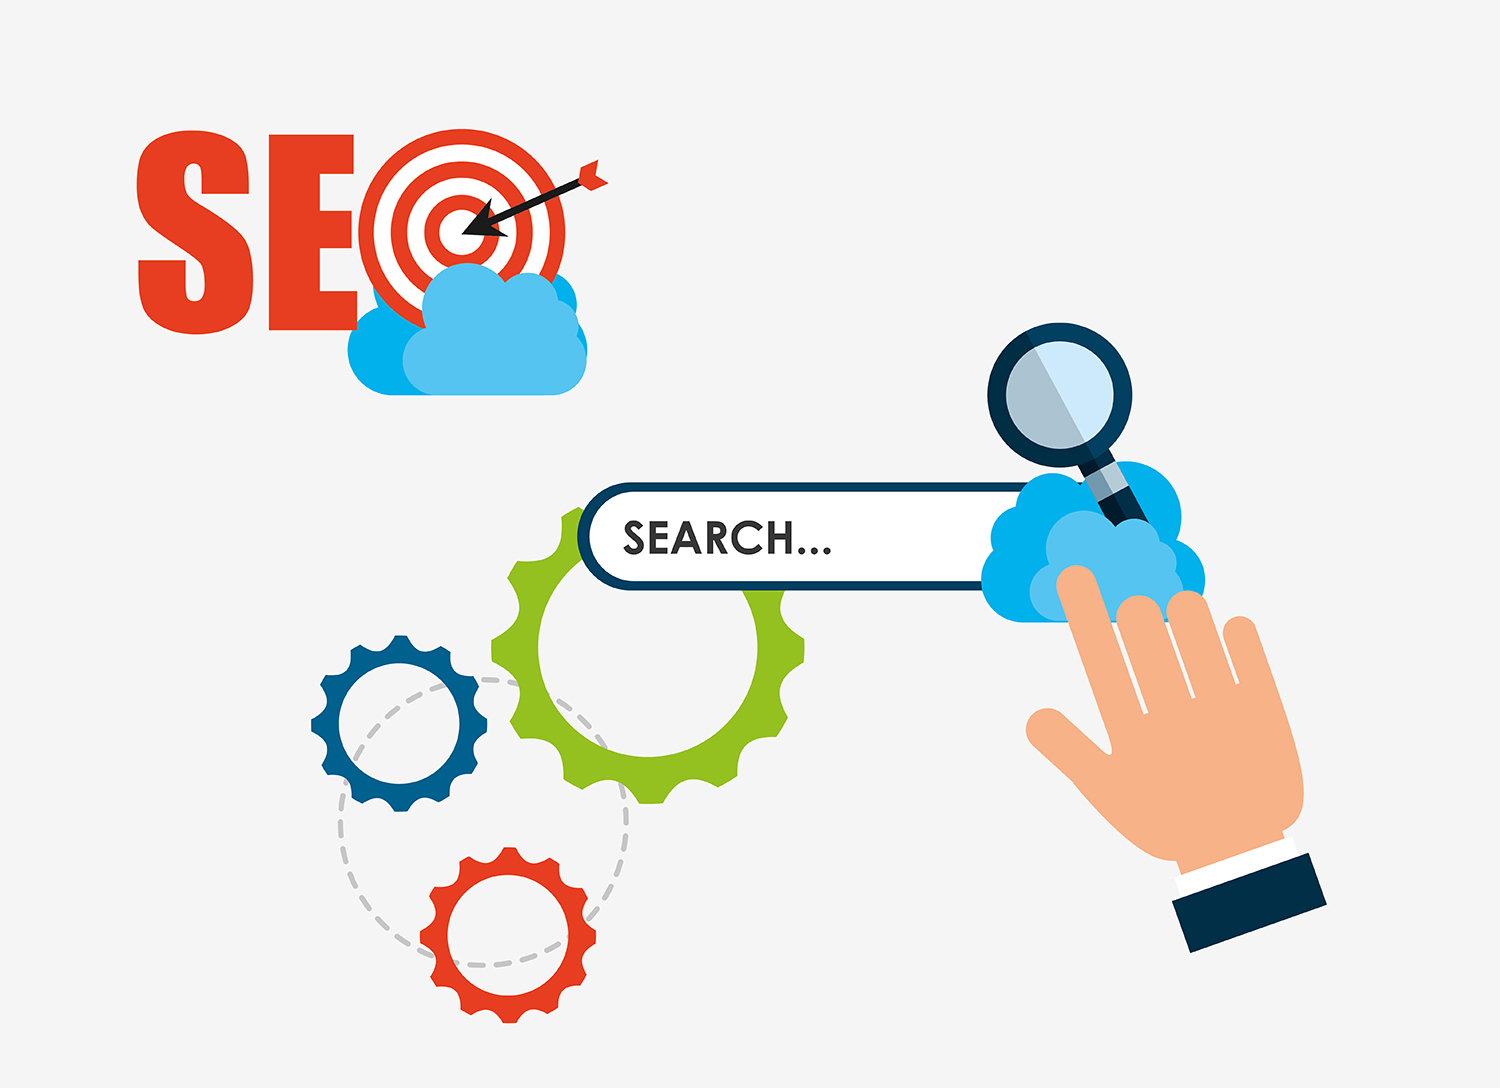 How Do I Rank Higher on Search Engines with SEO in 2021 – see here!